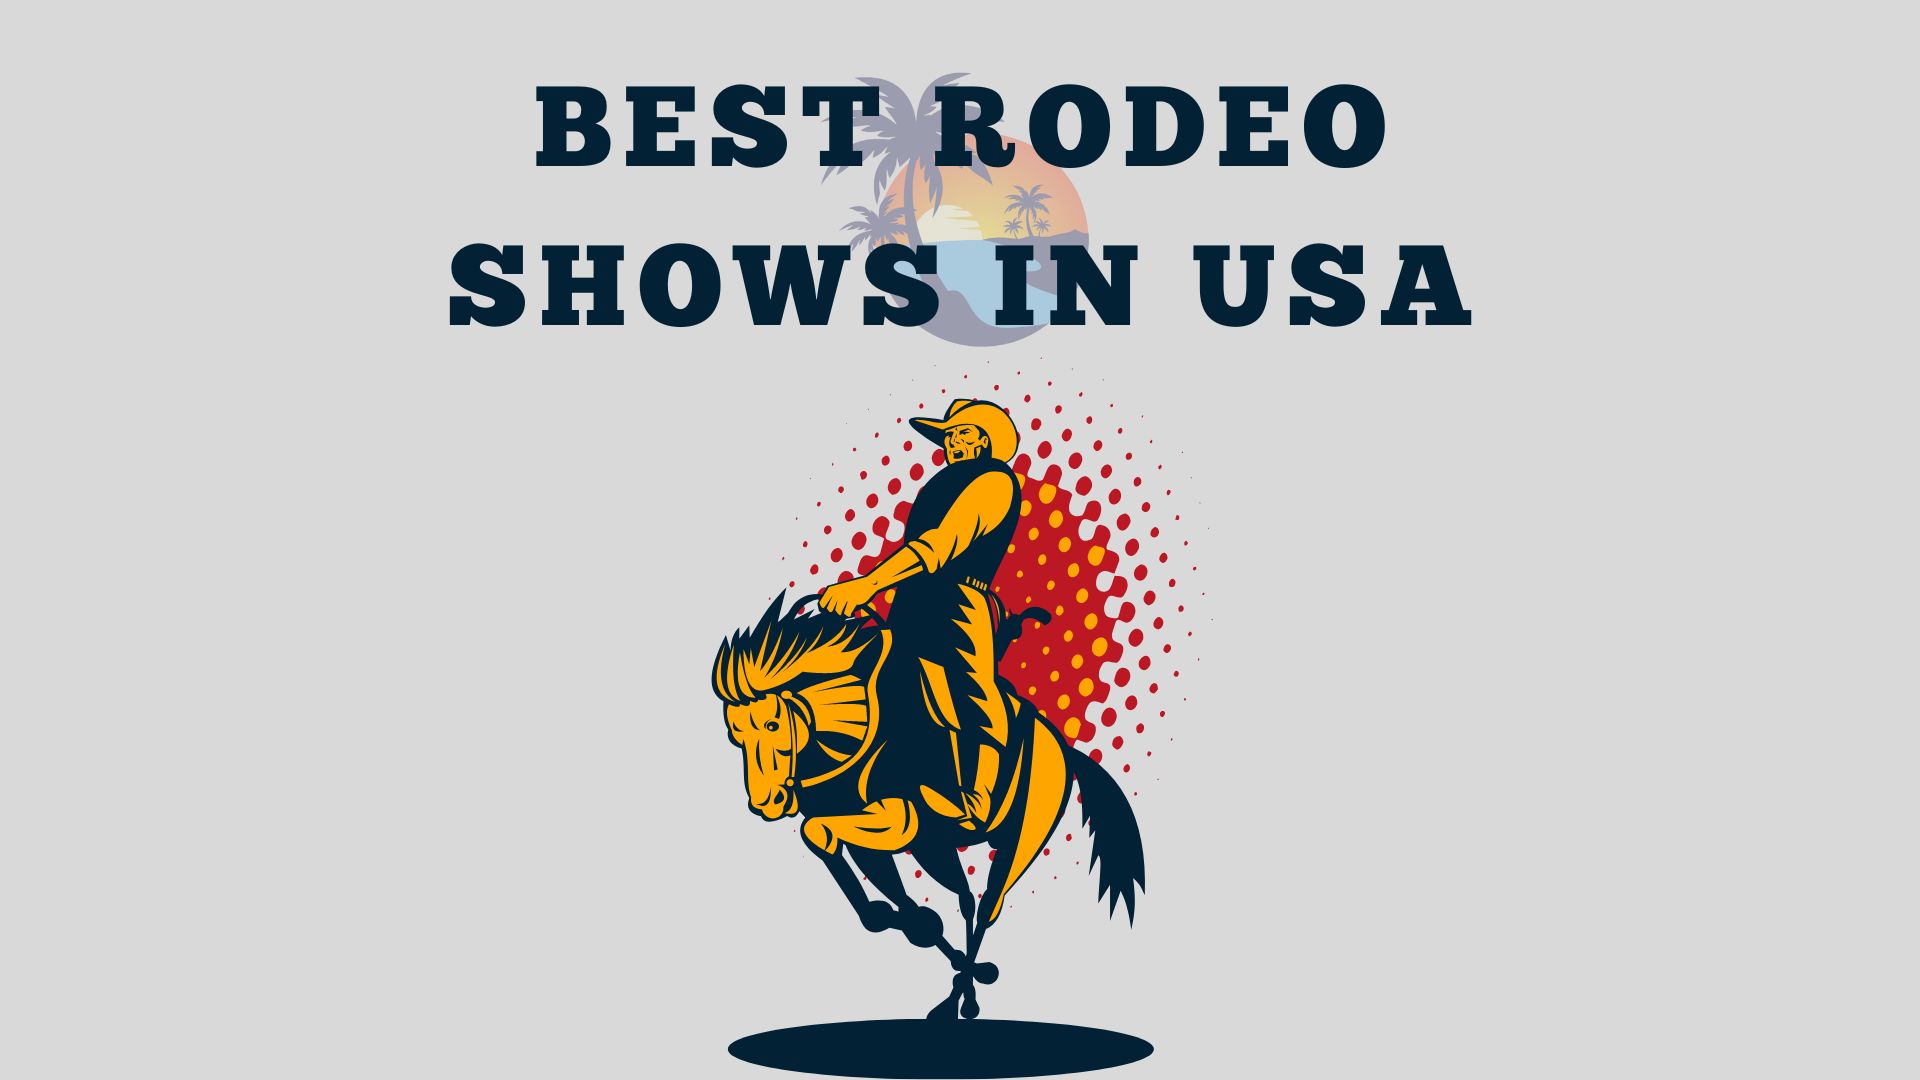 Best Rodeo Shows in USA